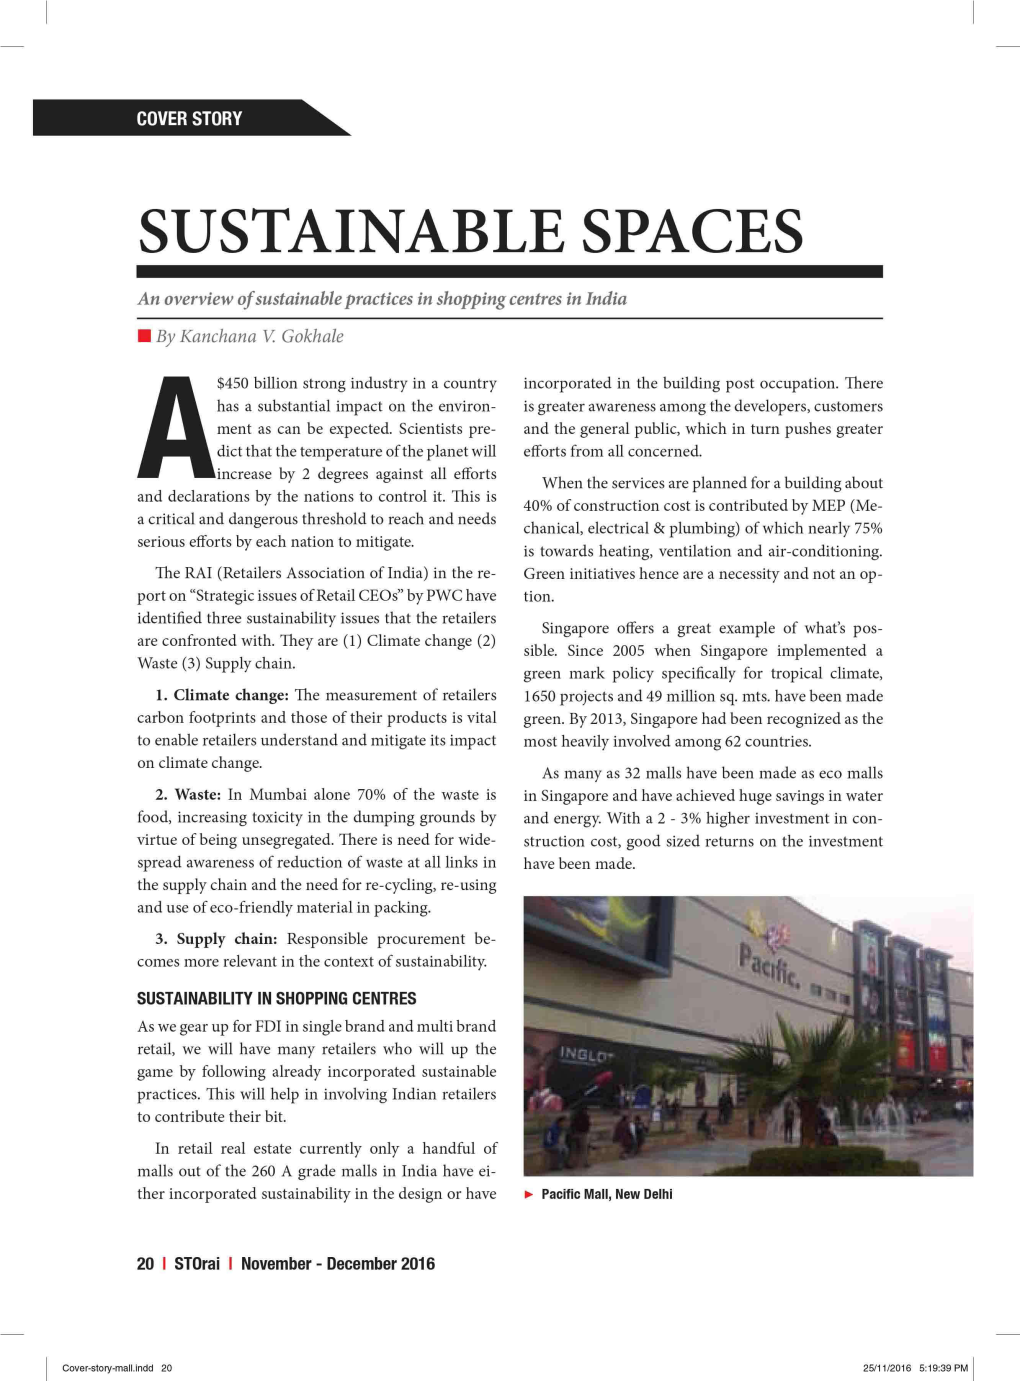 Sustainable Spaces